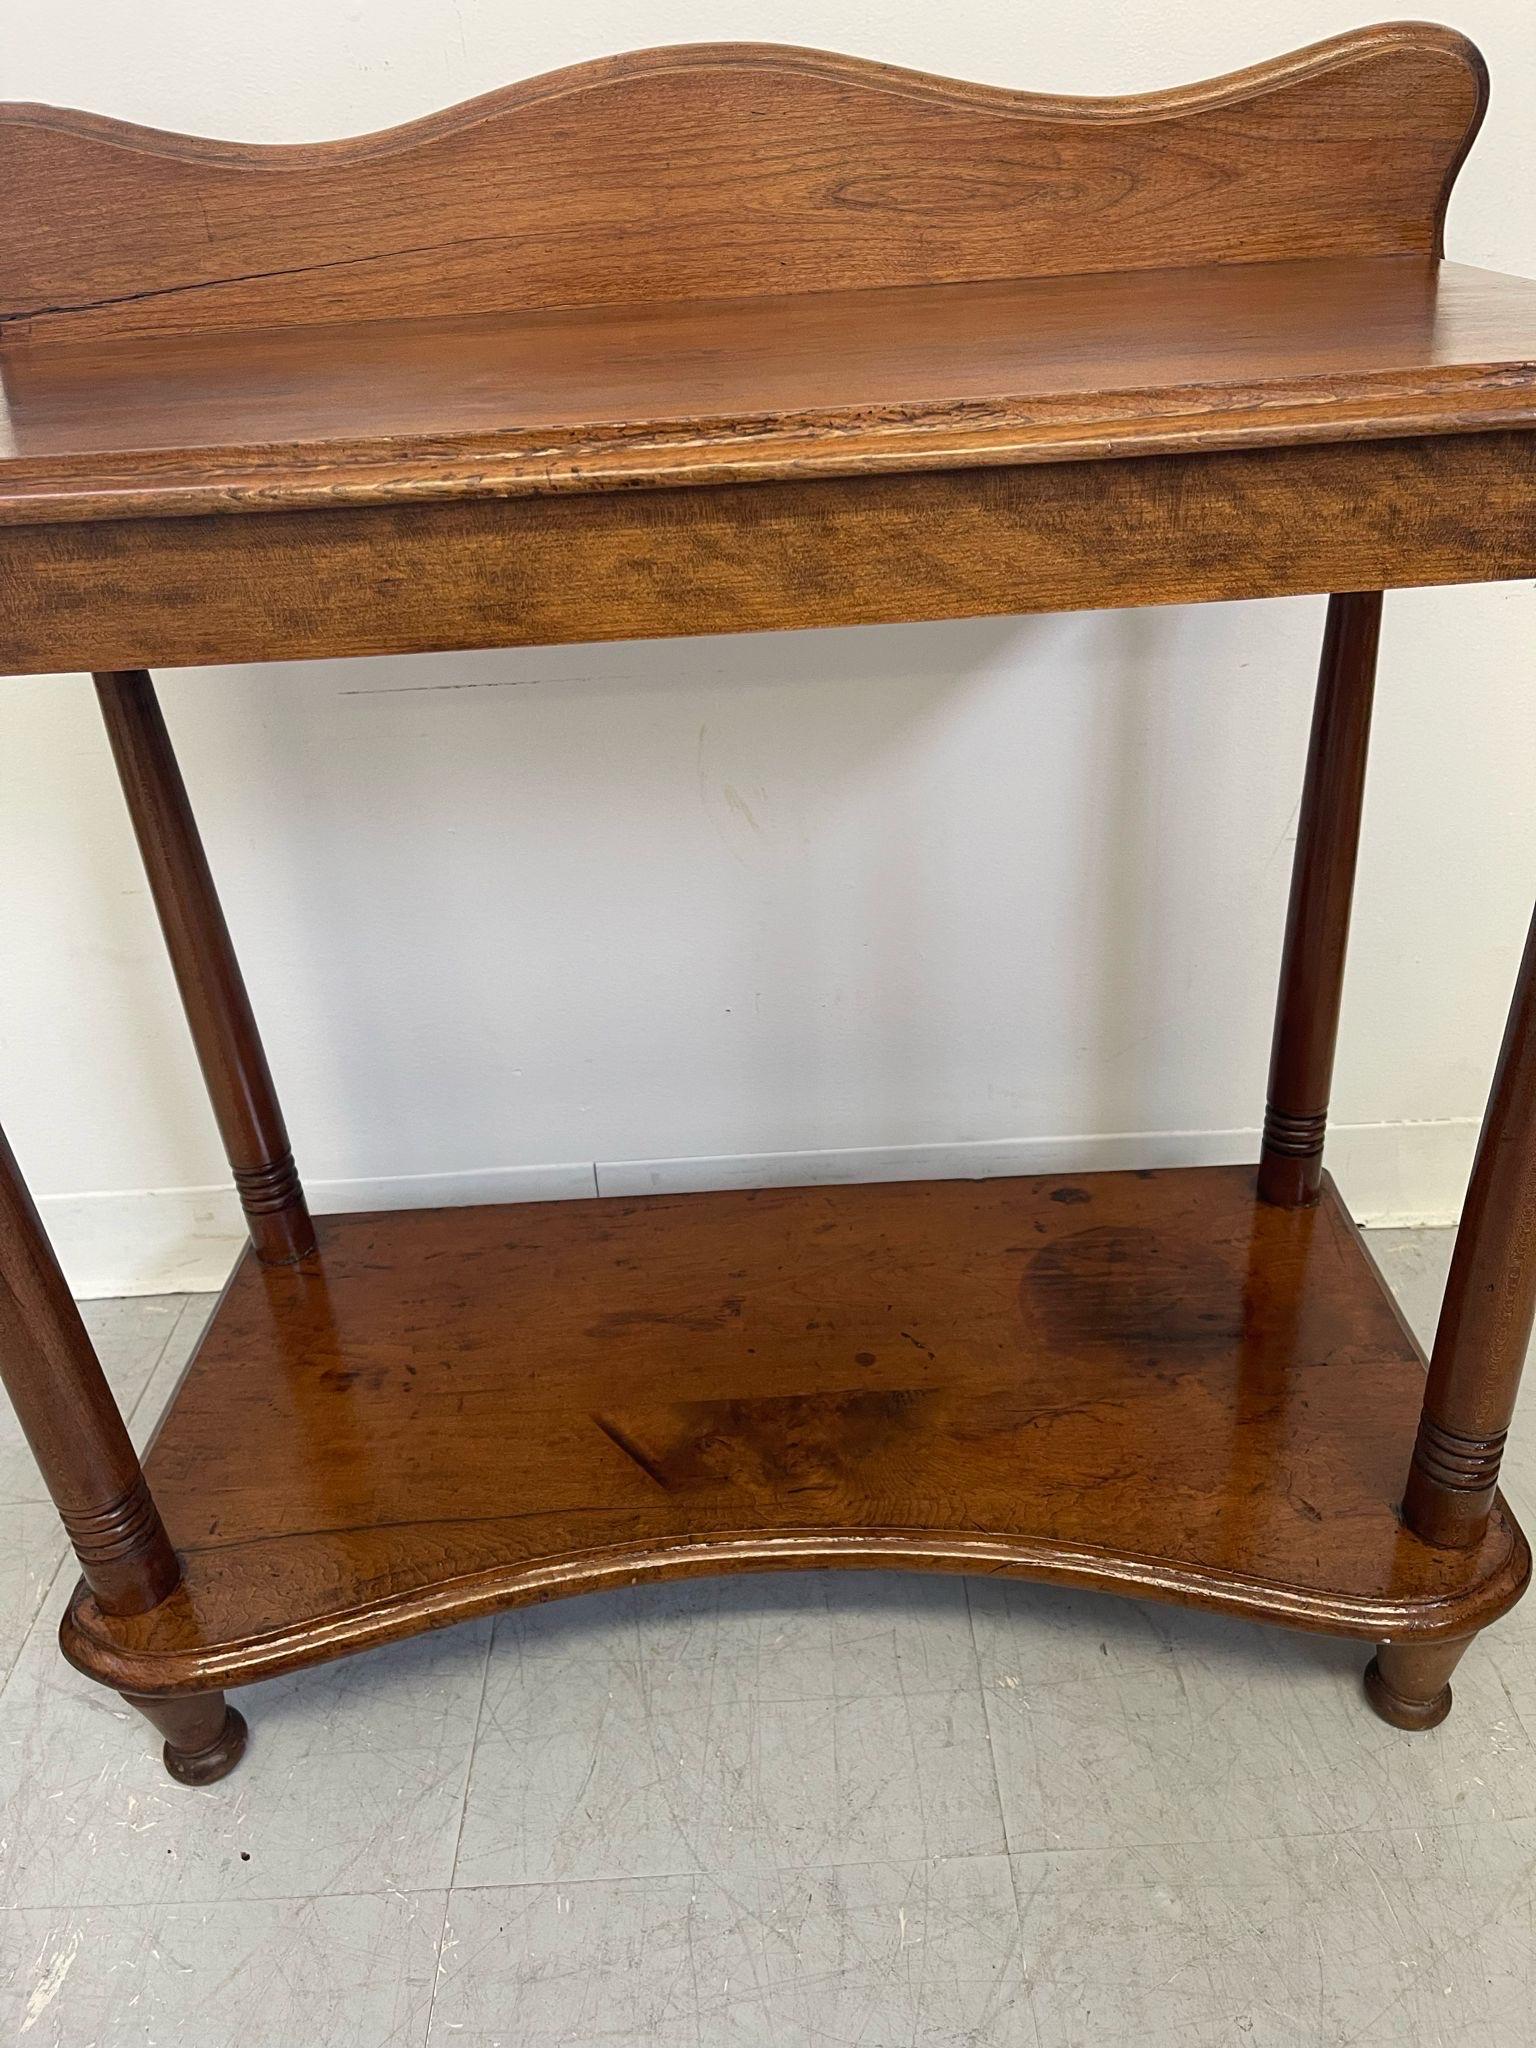 Mid-19th Century Antique Wooden Console Side Table With Turned Legs. For Sale